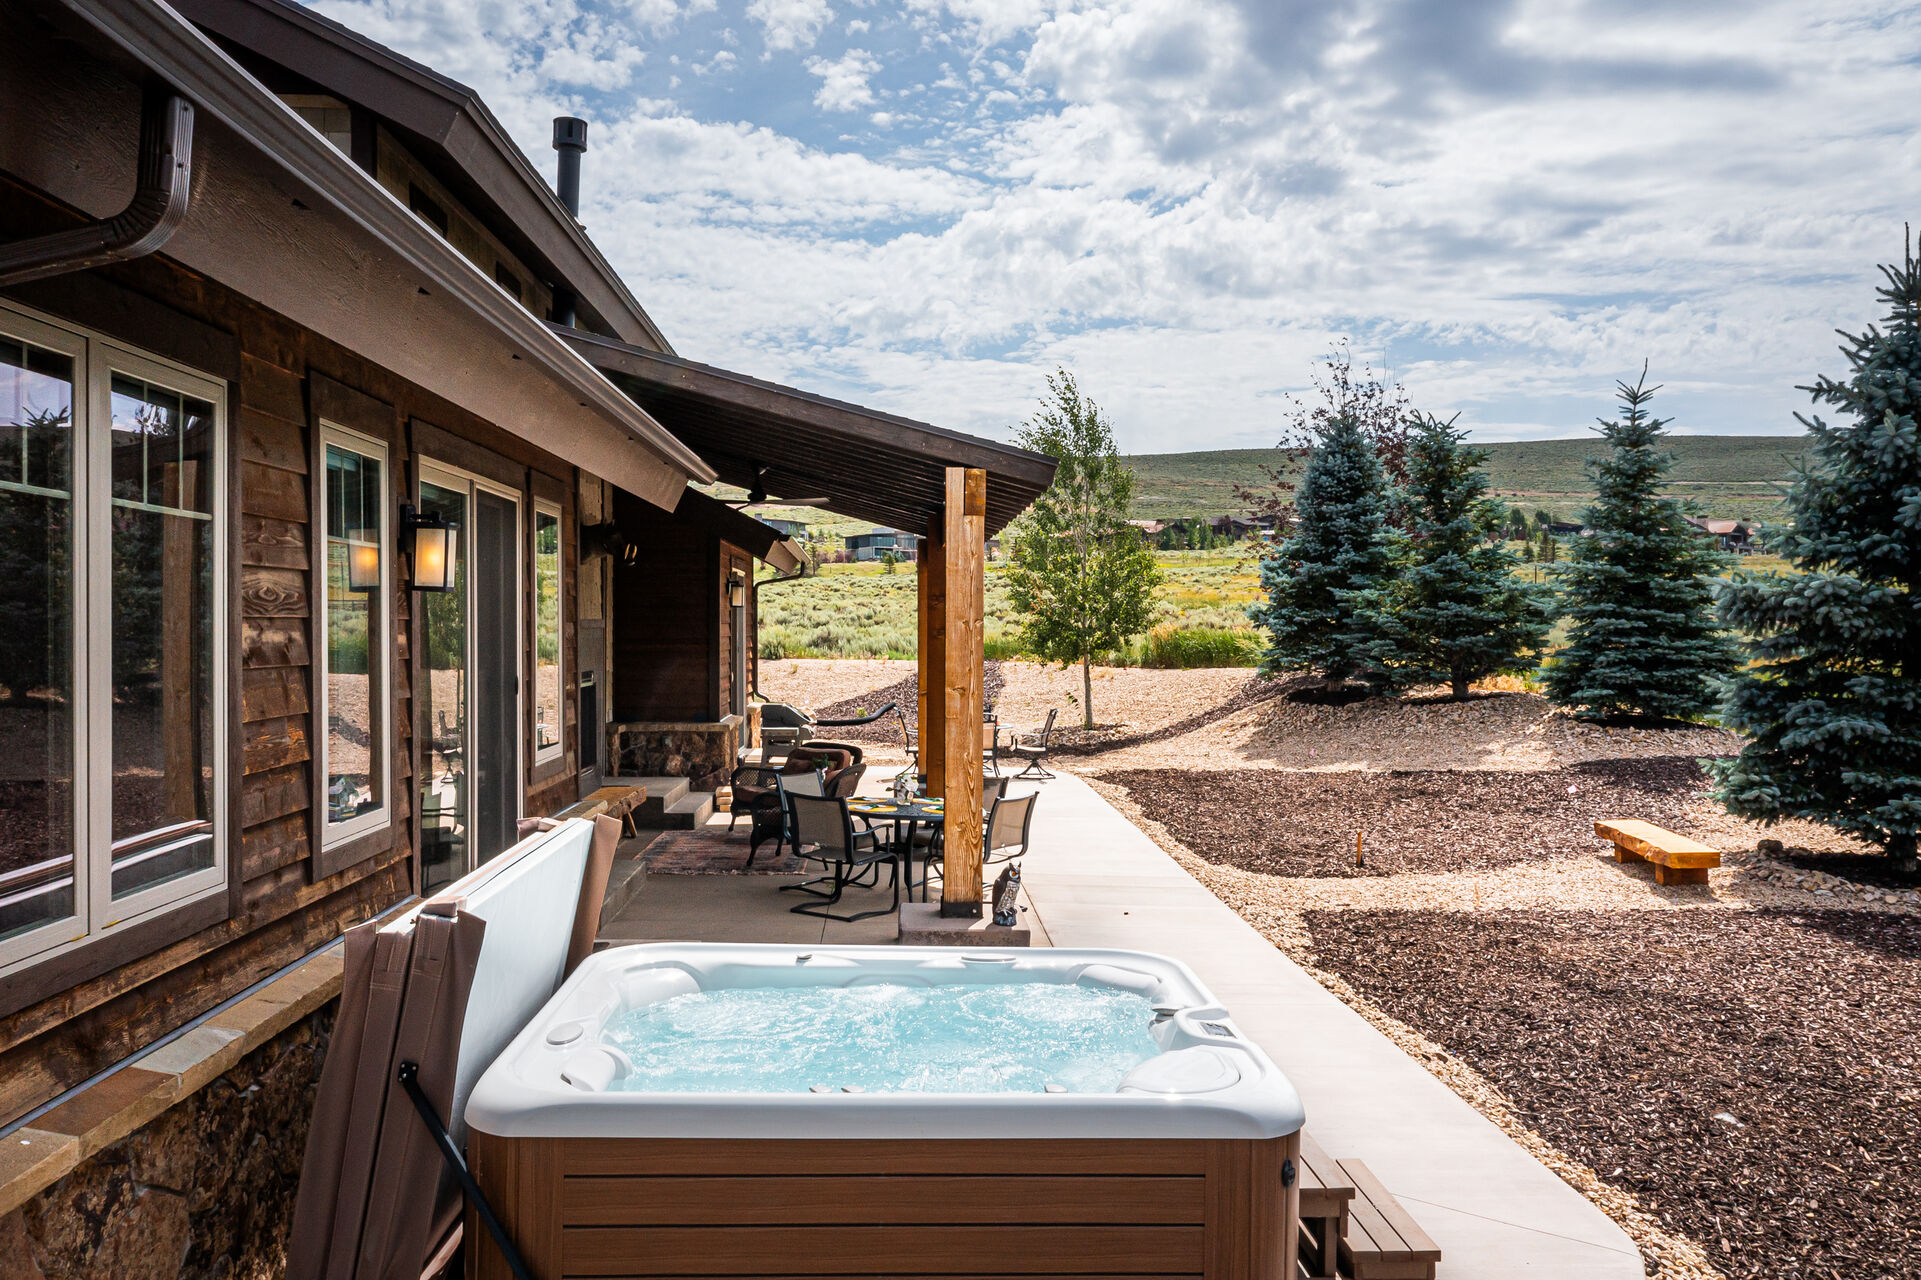 Enjoy majestic views while relaxing in the private hot tub